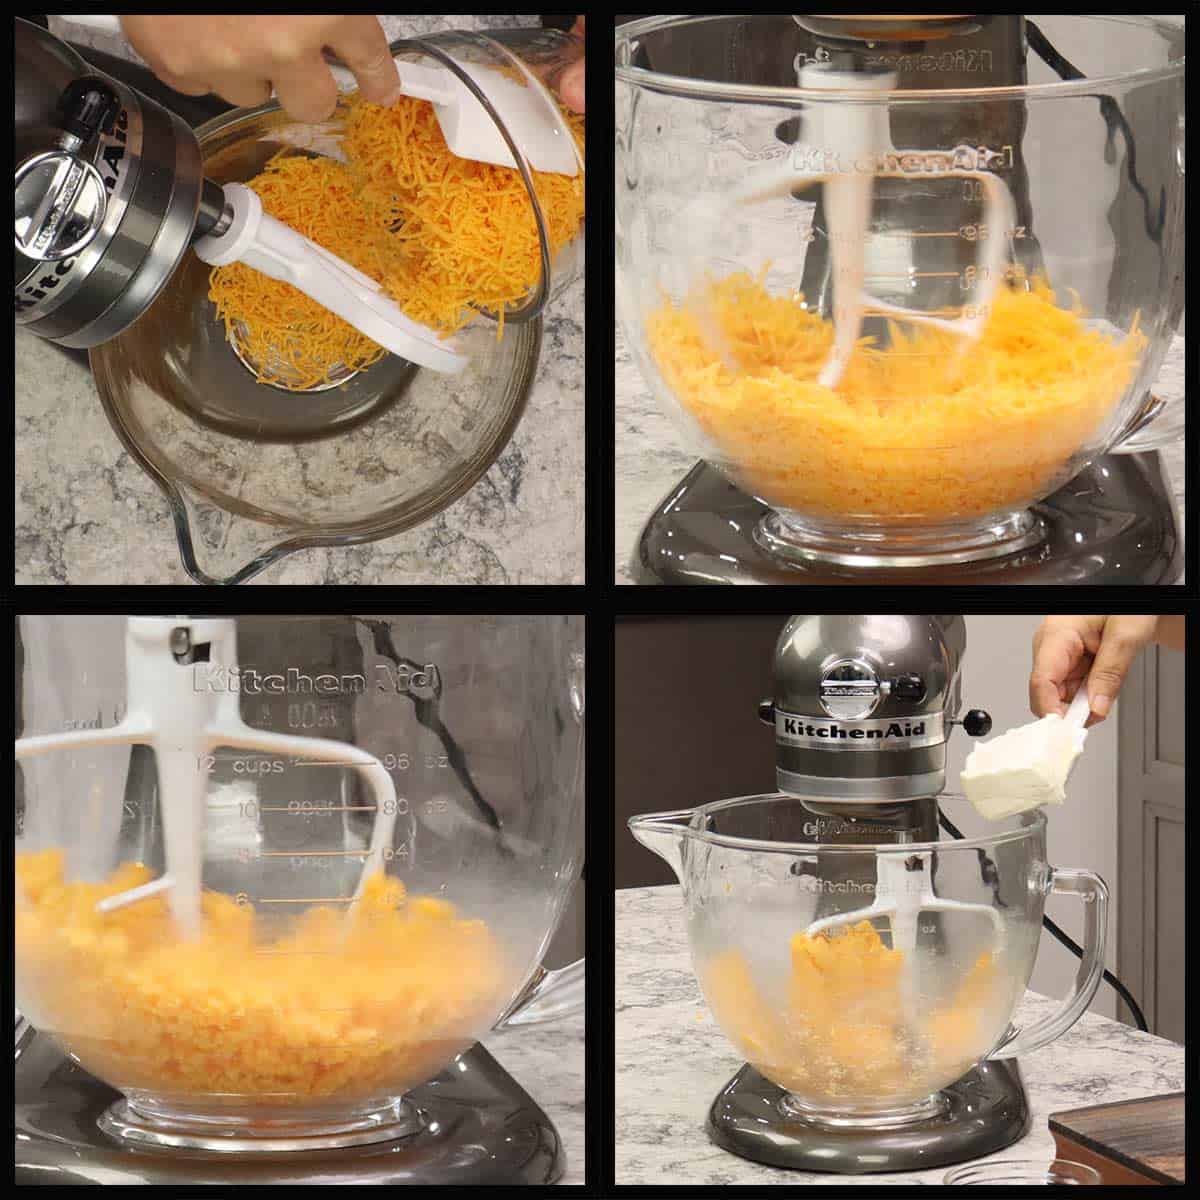 Mixing the cheddar cheese to soften and blend it in a stand mixer.